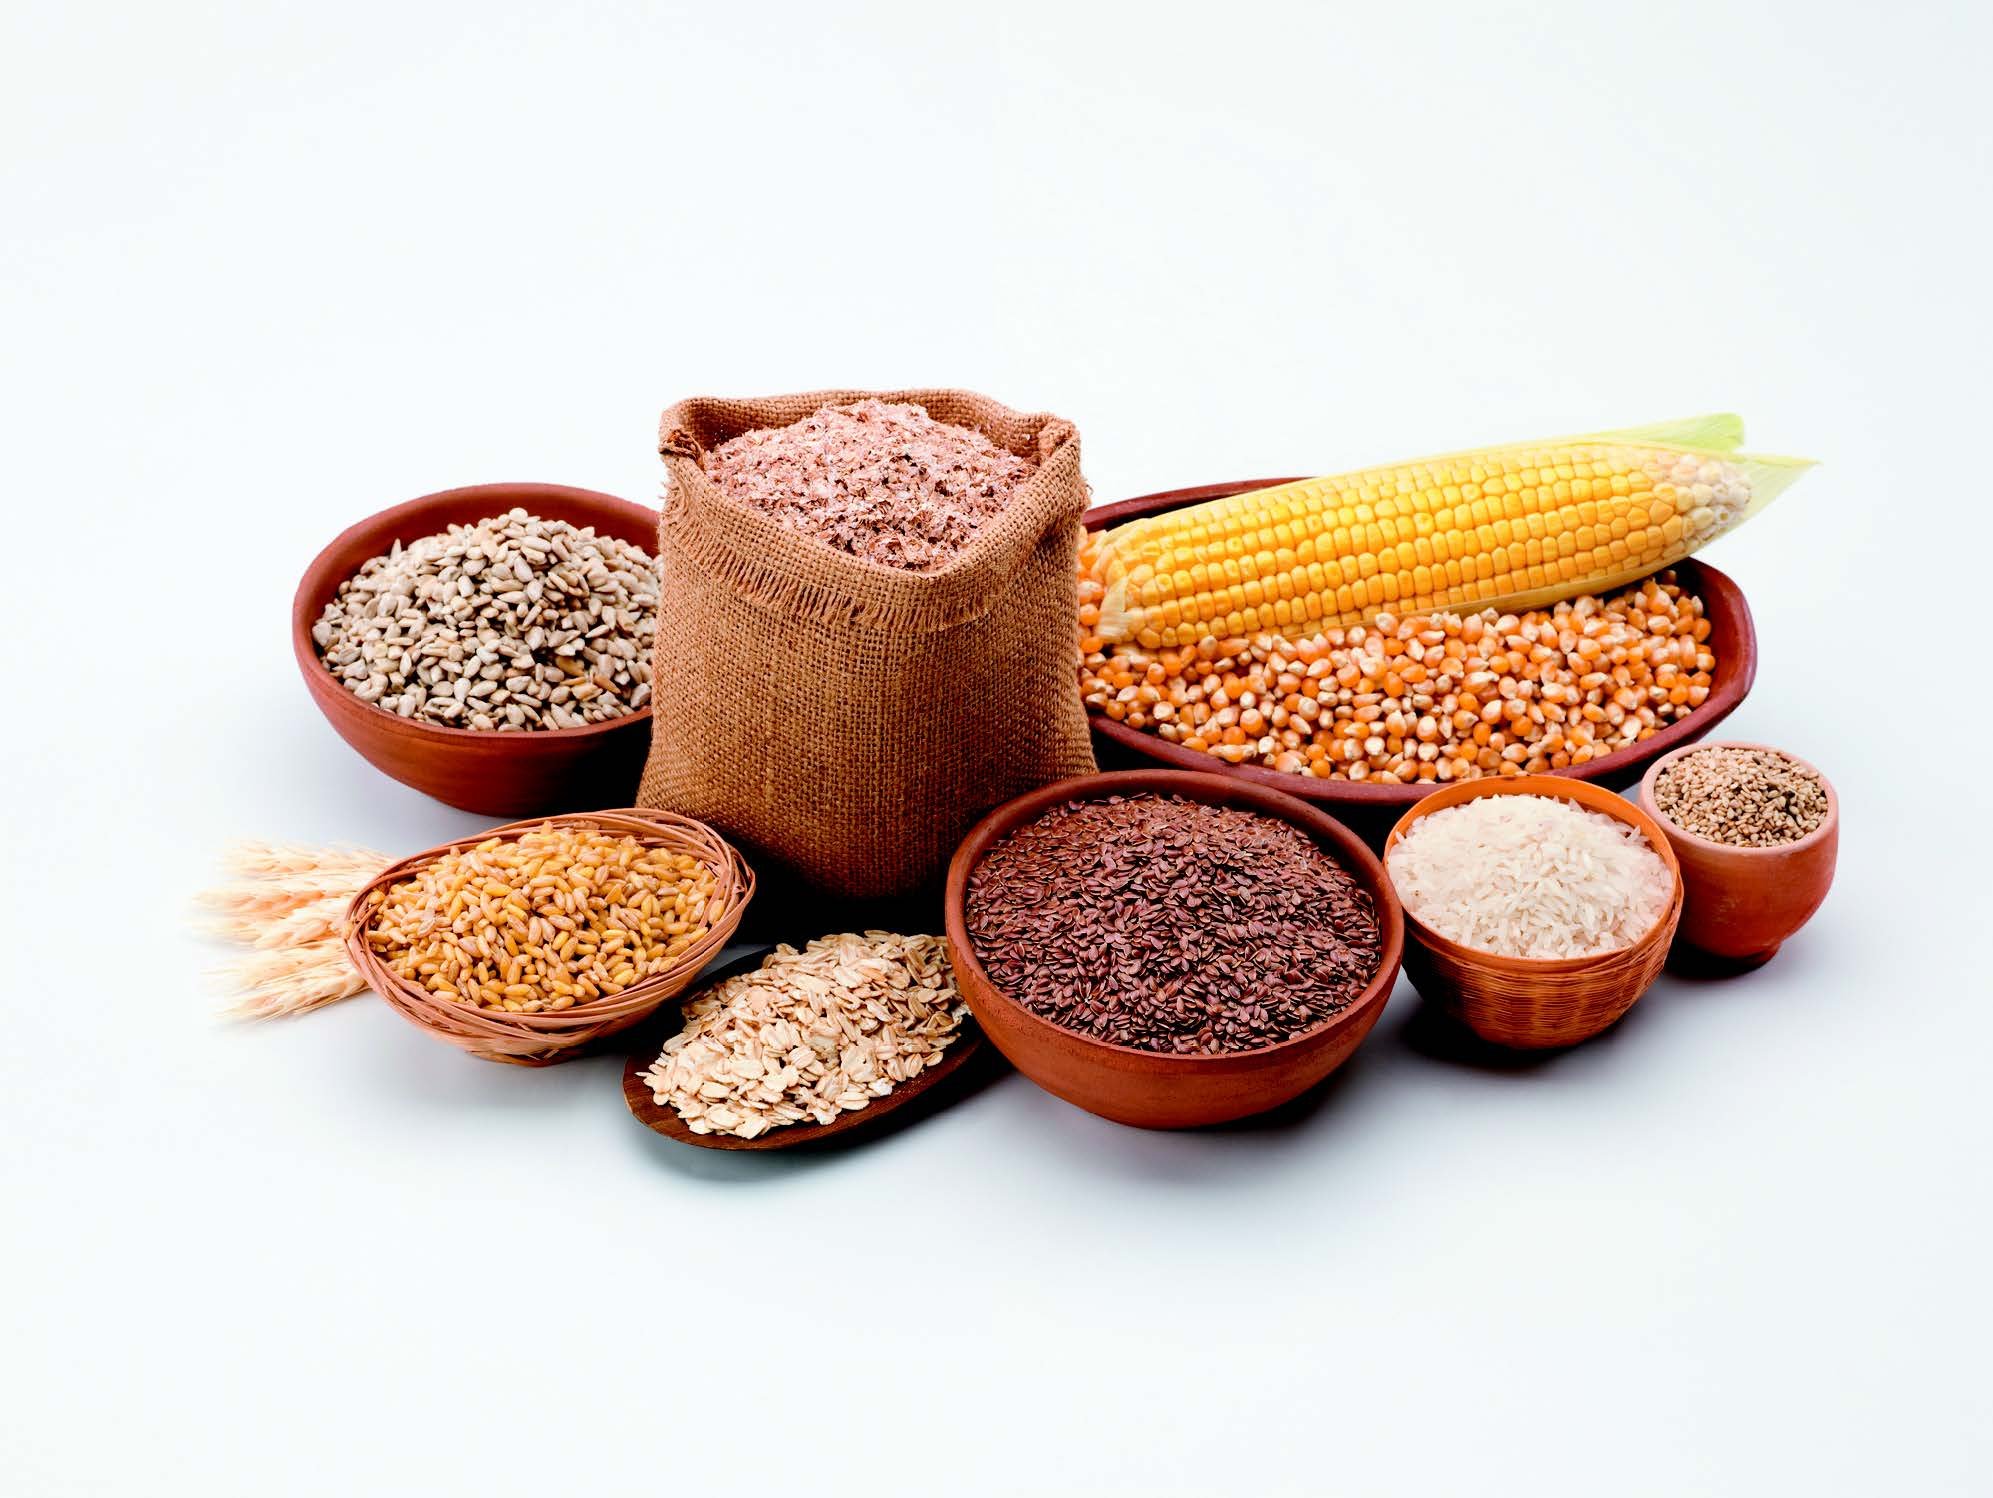 The Whole Truth About Whole Grains (2021) The benefits of whole grains